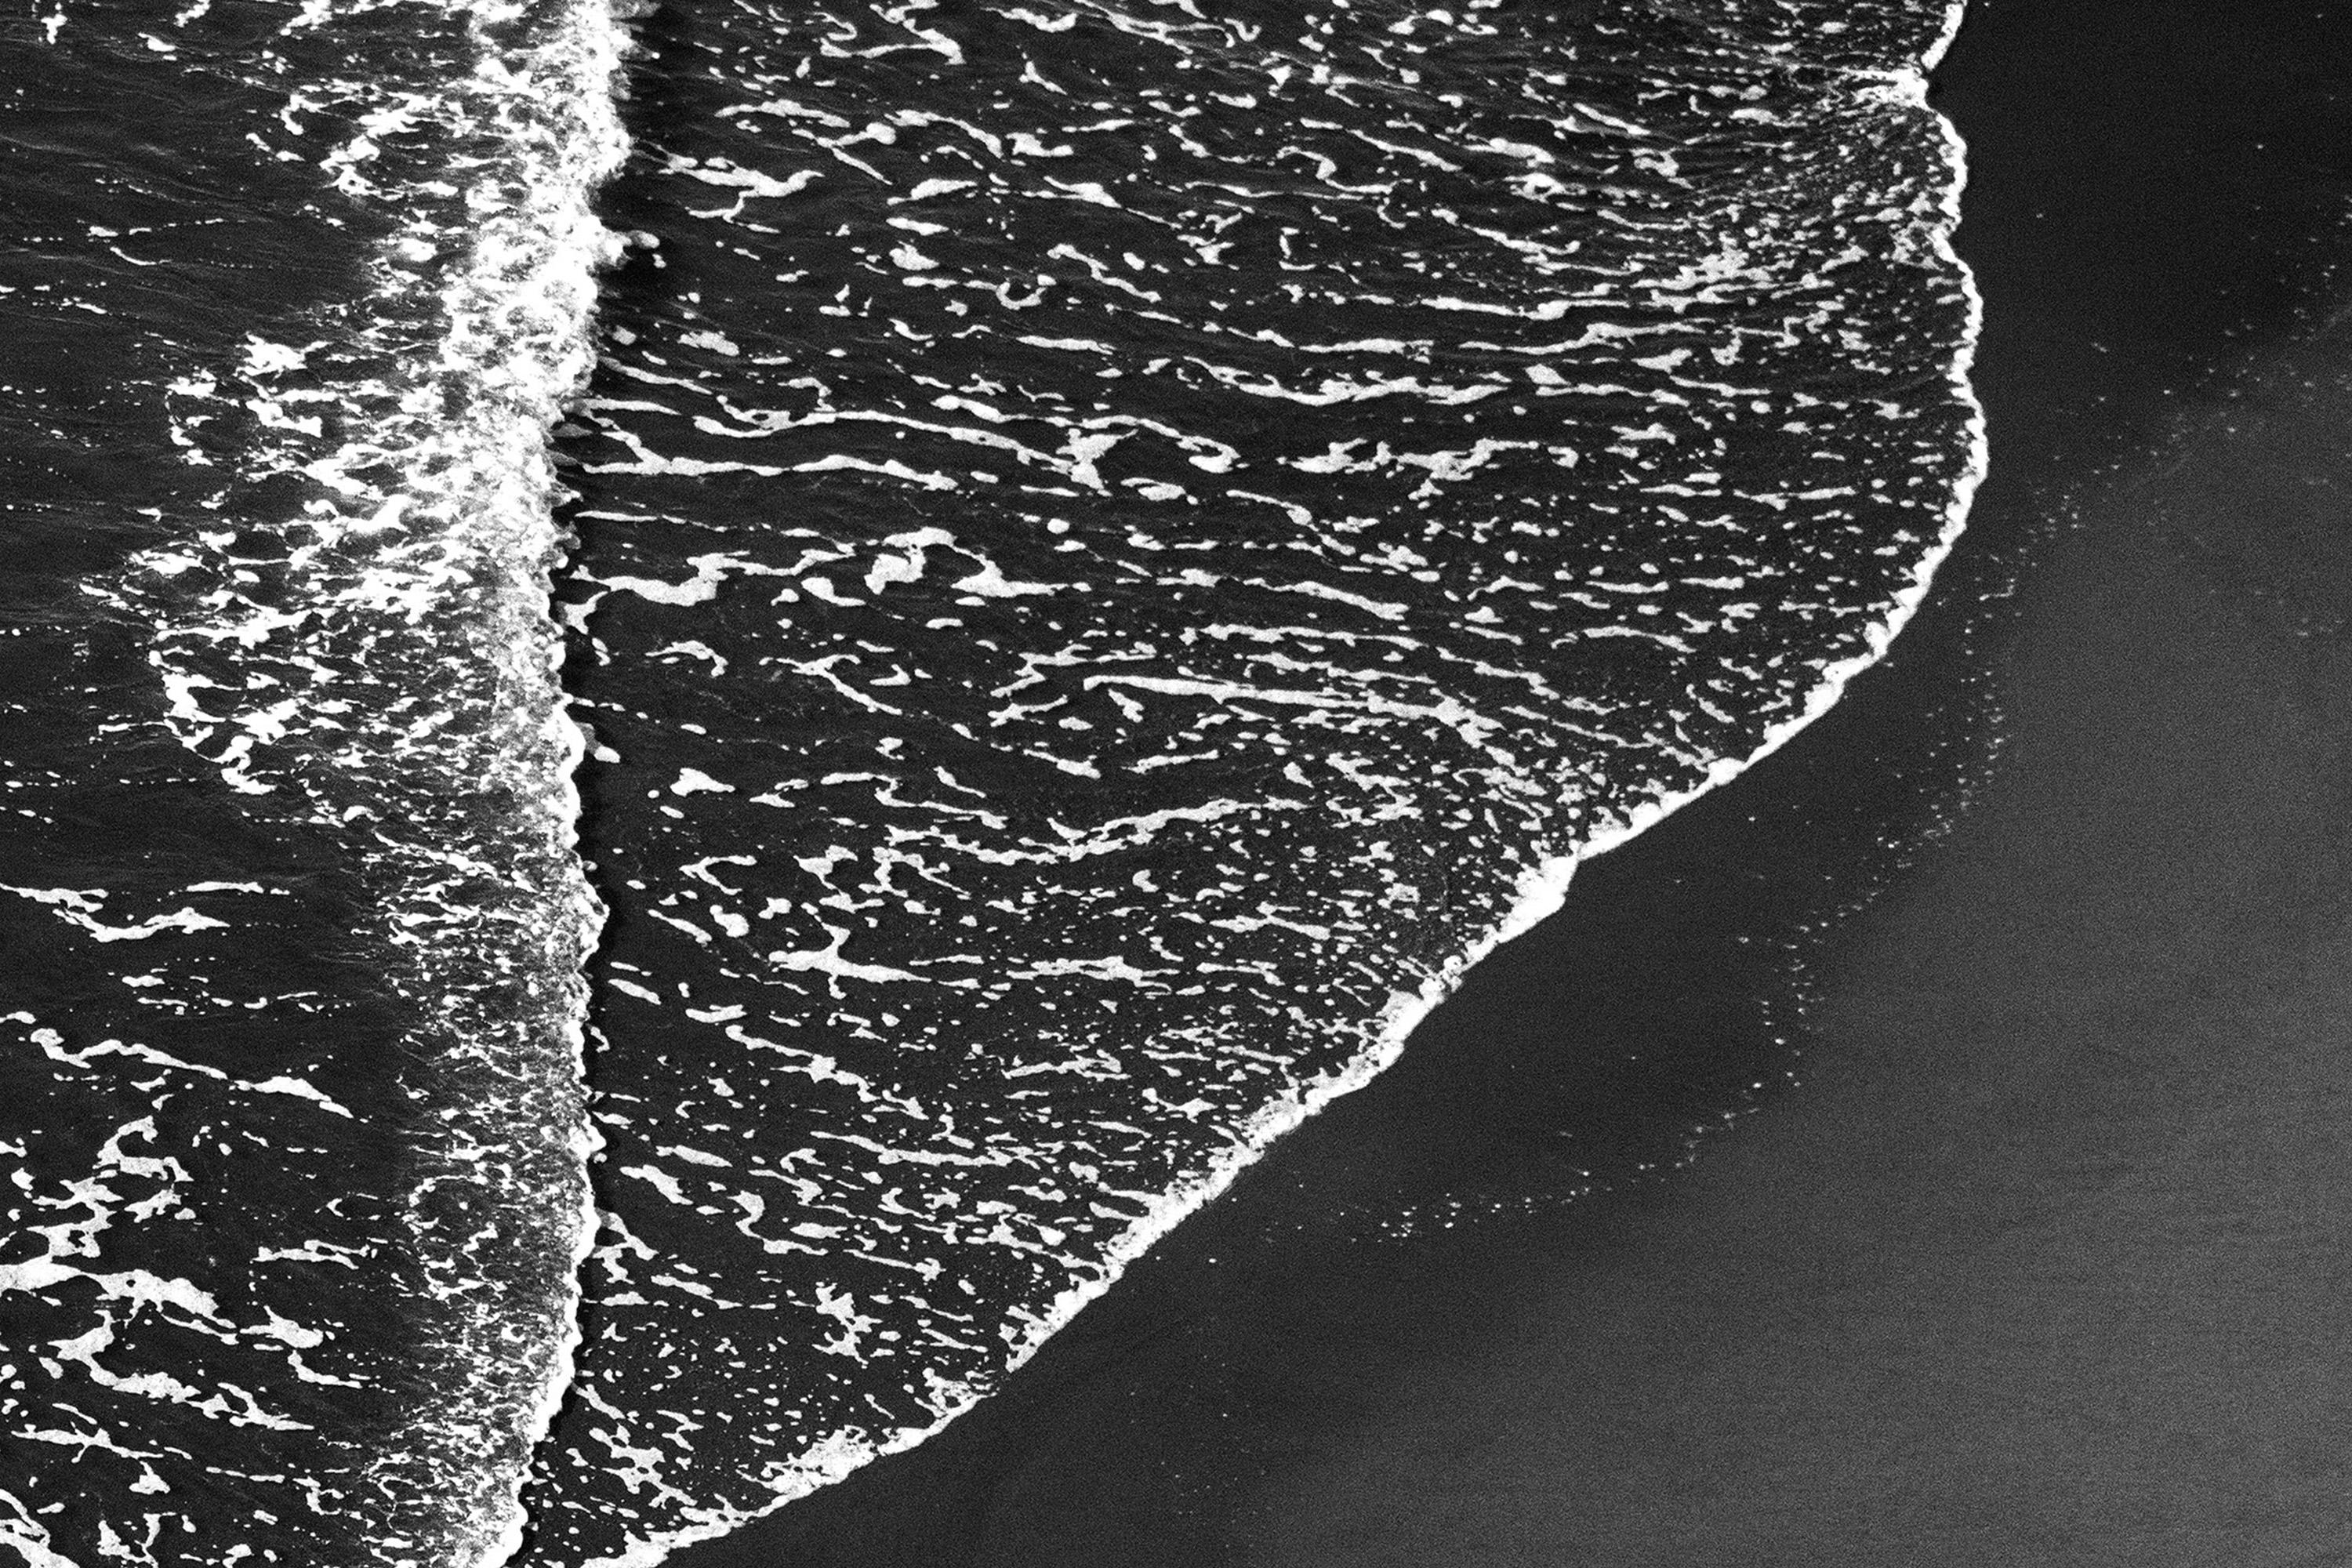 Pacific Foamy Shoreline, Black and White Seascape, Minimal Style Giclée, Classy - Minimalist Photograph by Kind of Cyan